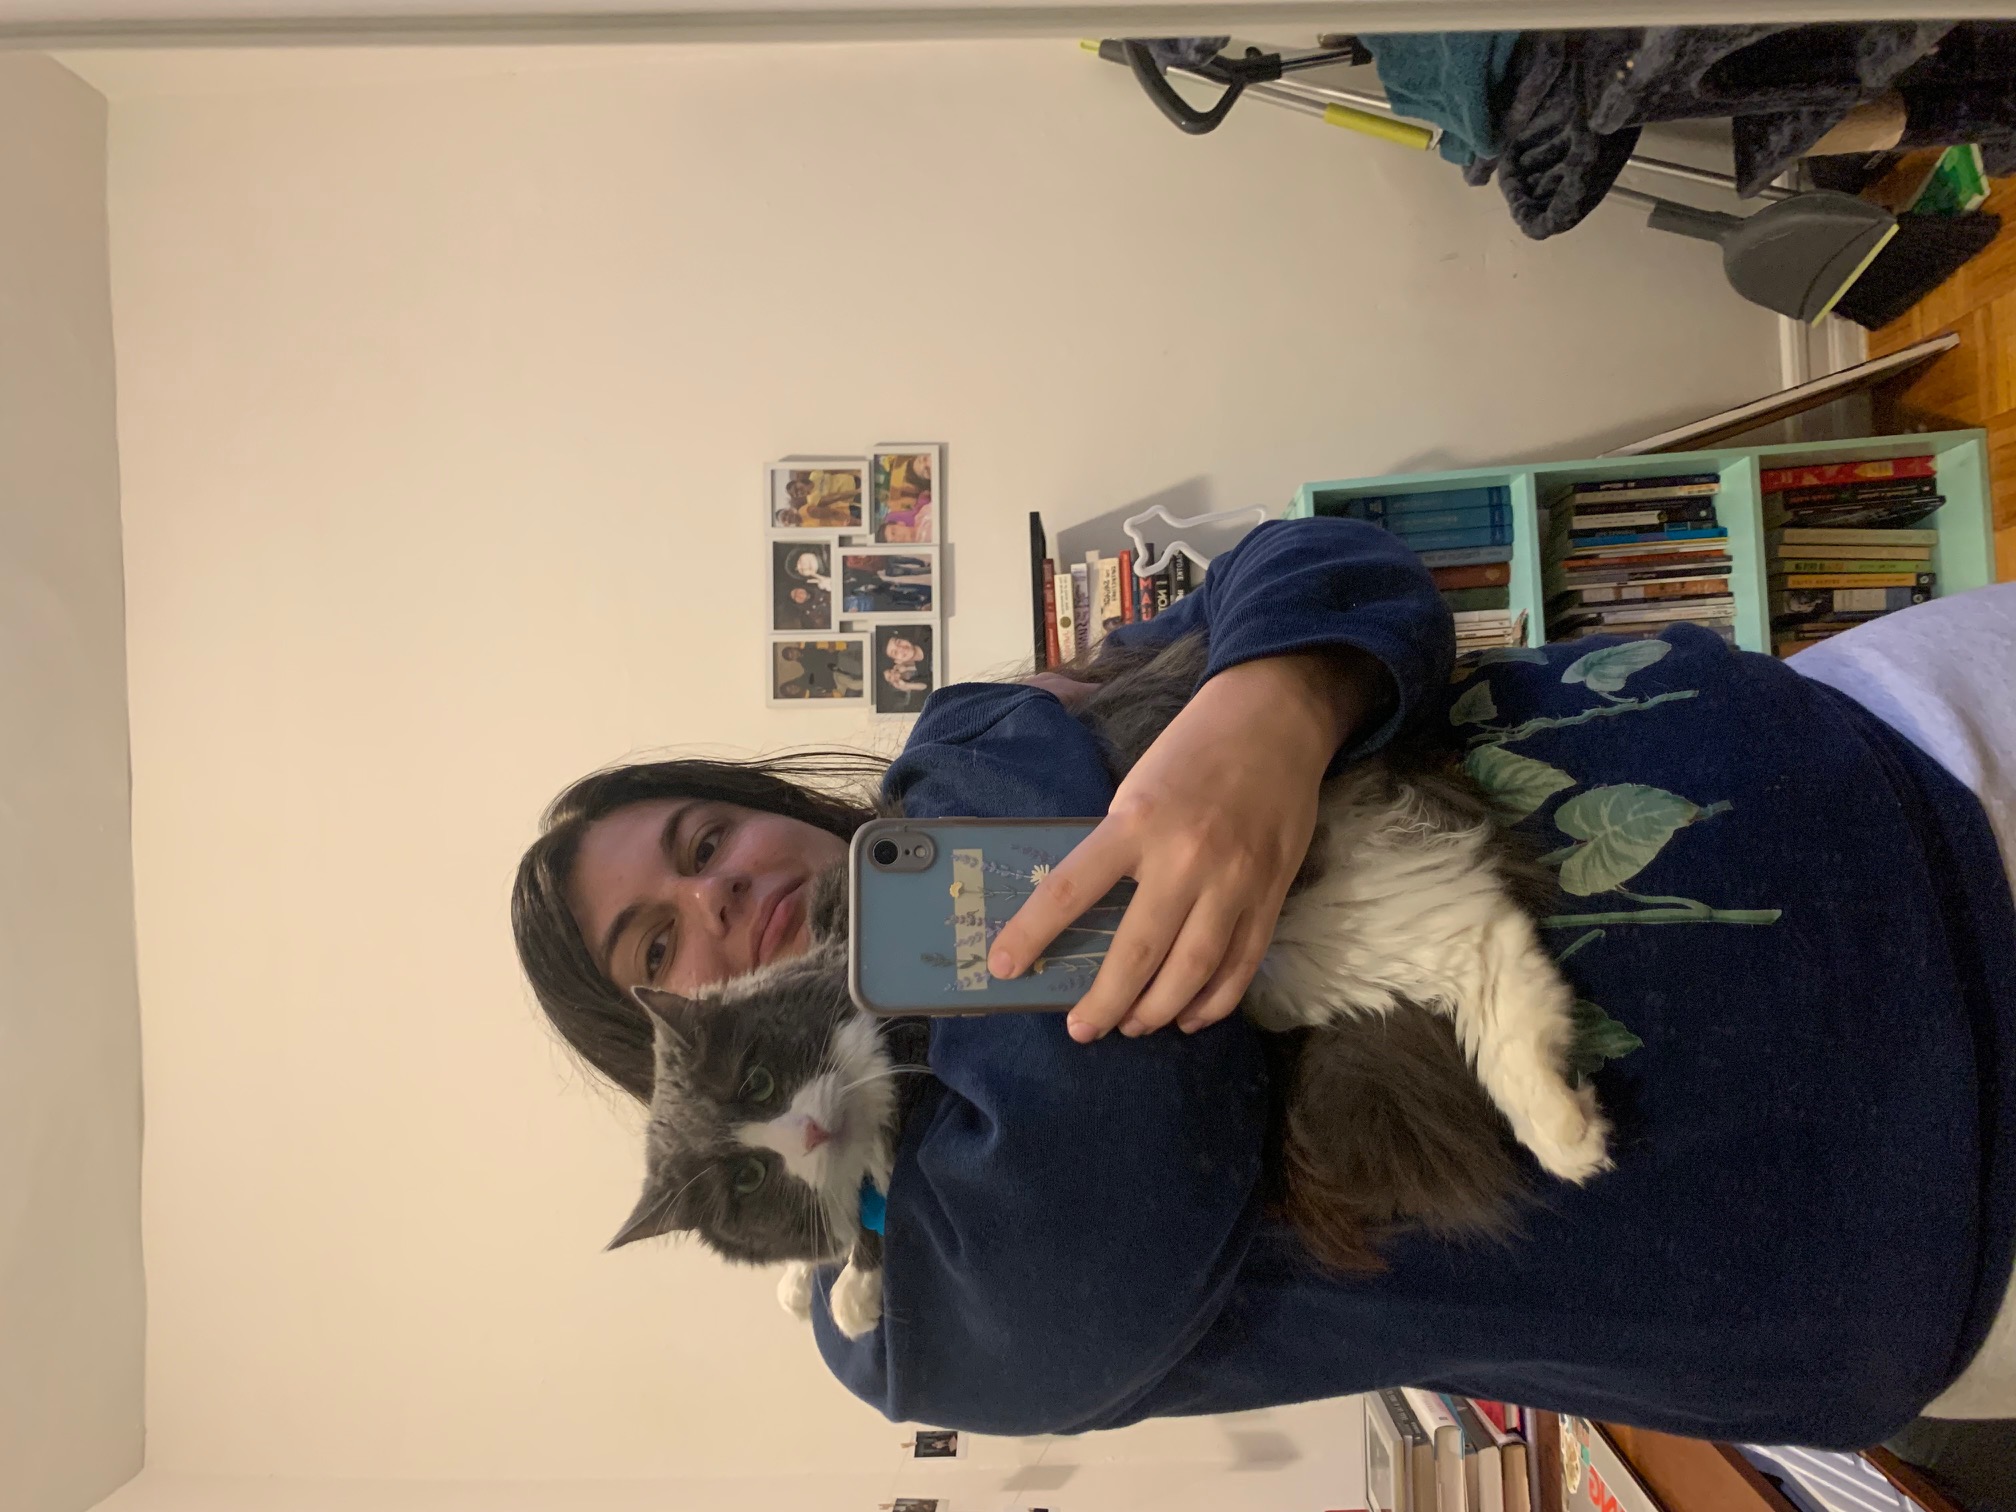 A mirror selfie of a white woman with brown hair wearing a sweatshirt and sweatpants and holding a long-haired gray-and-white cat with mint green eyes.